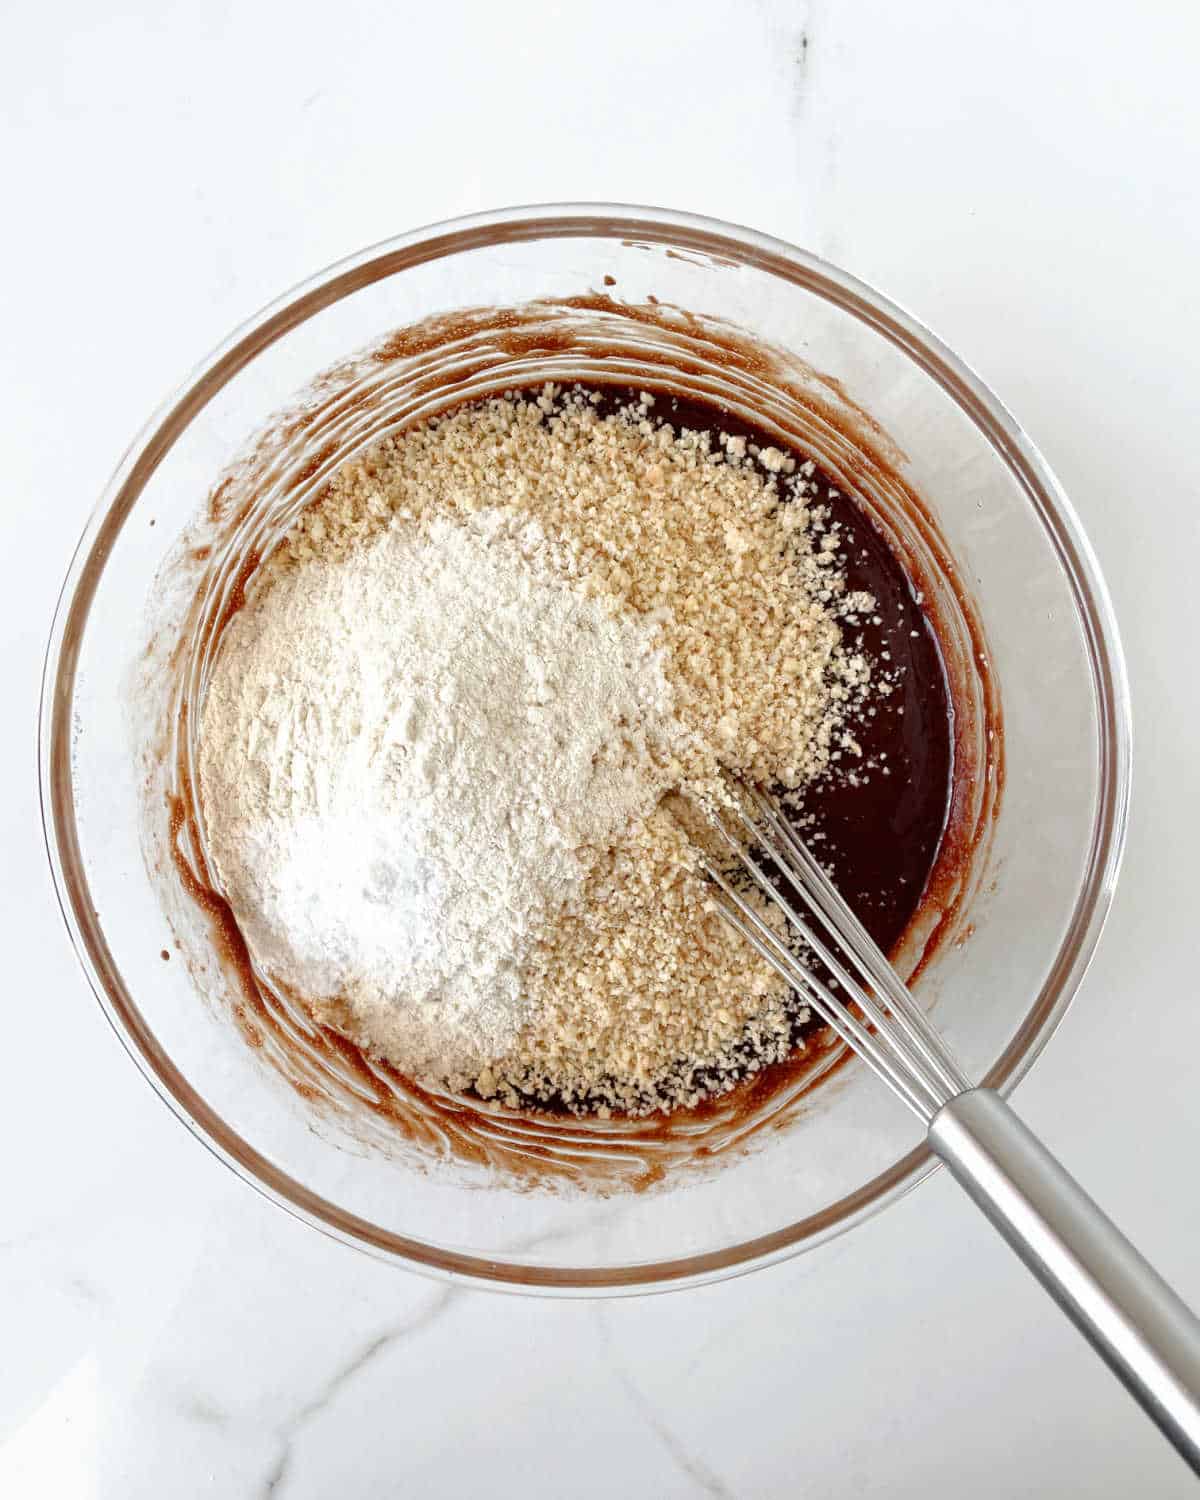 Ground hazelnuts and flour on a glass bowl with brownie batter on a white marble surface.